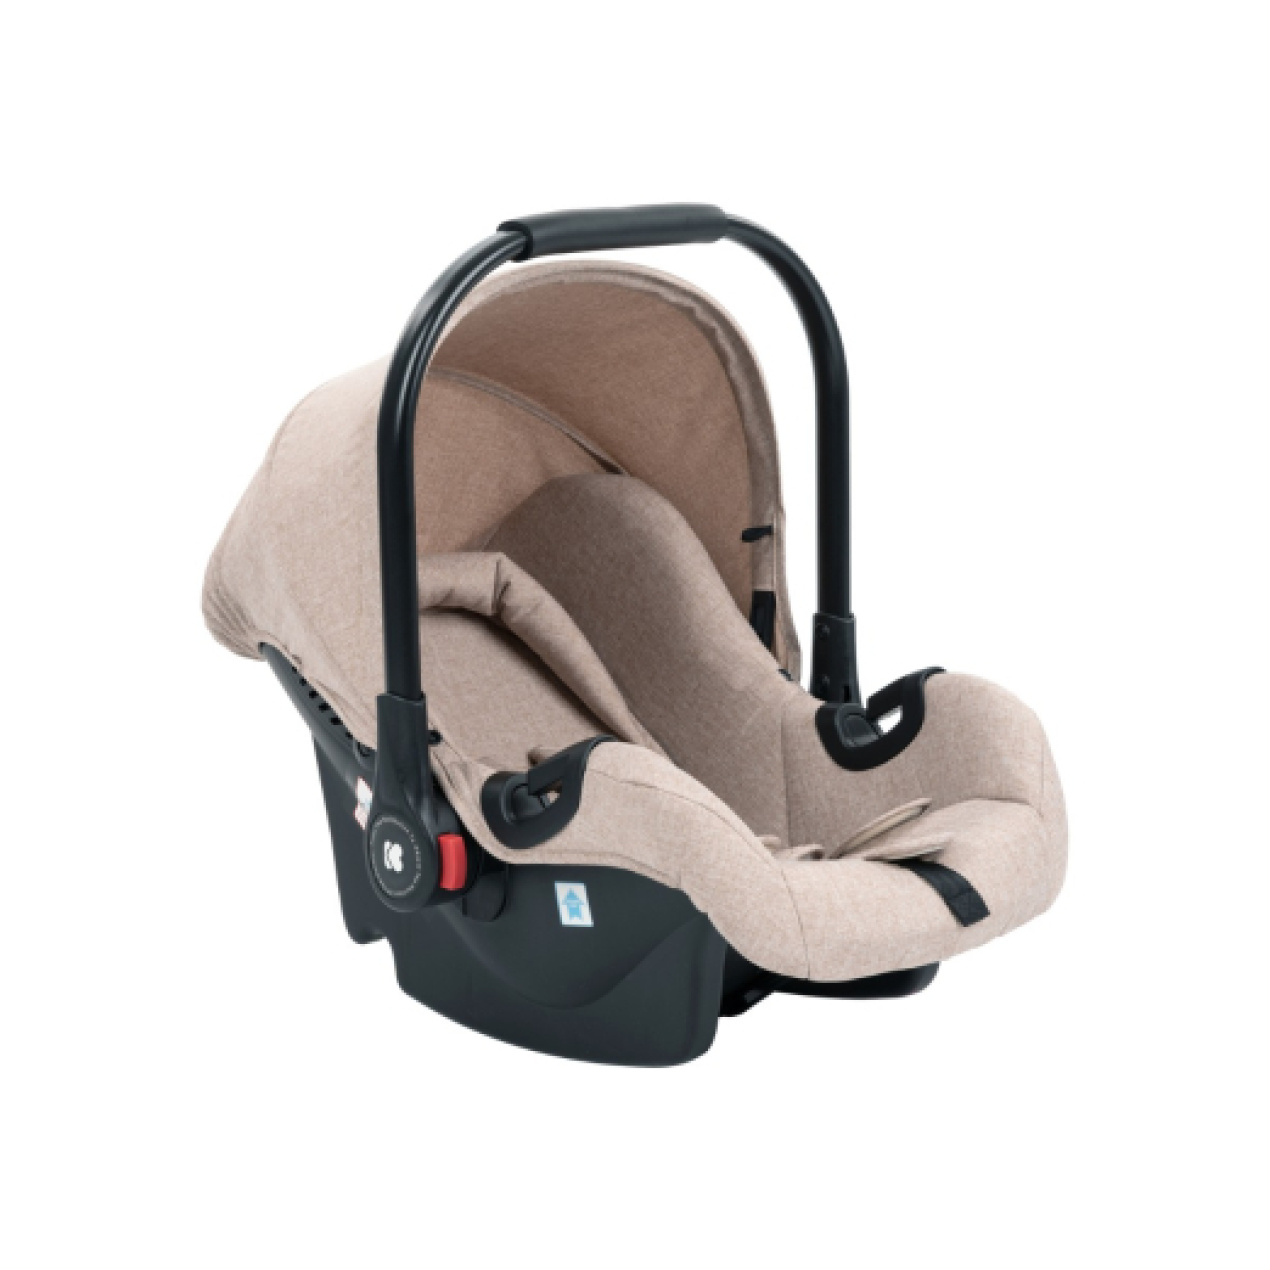 gianni-3in1-with-carrycot-car-seat-beige